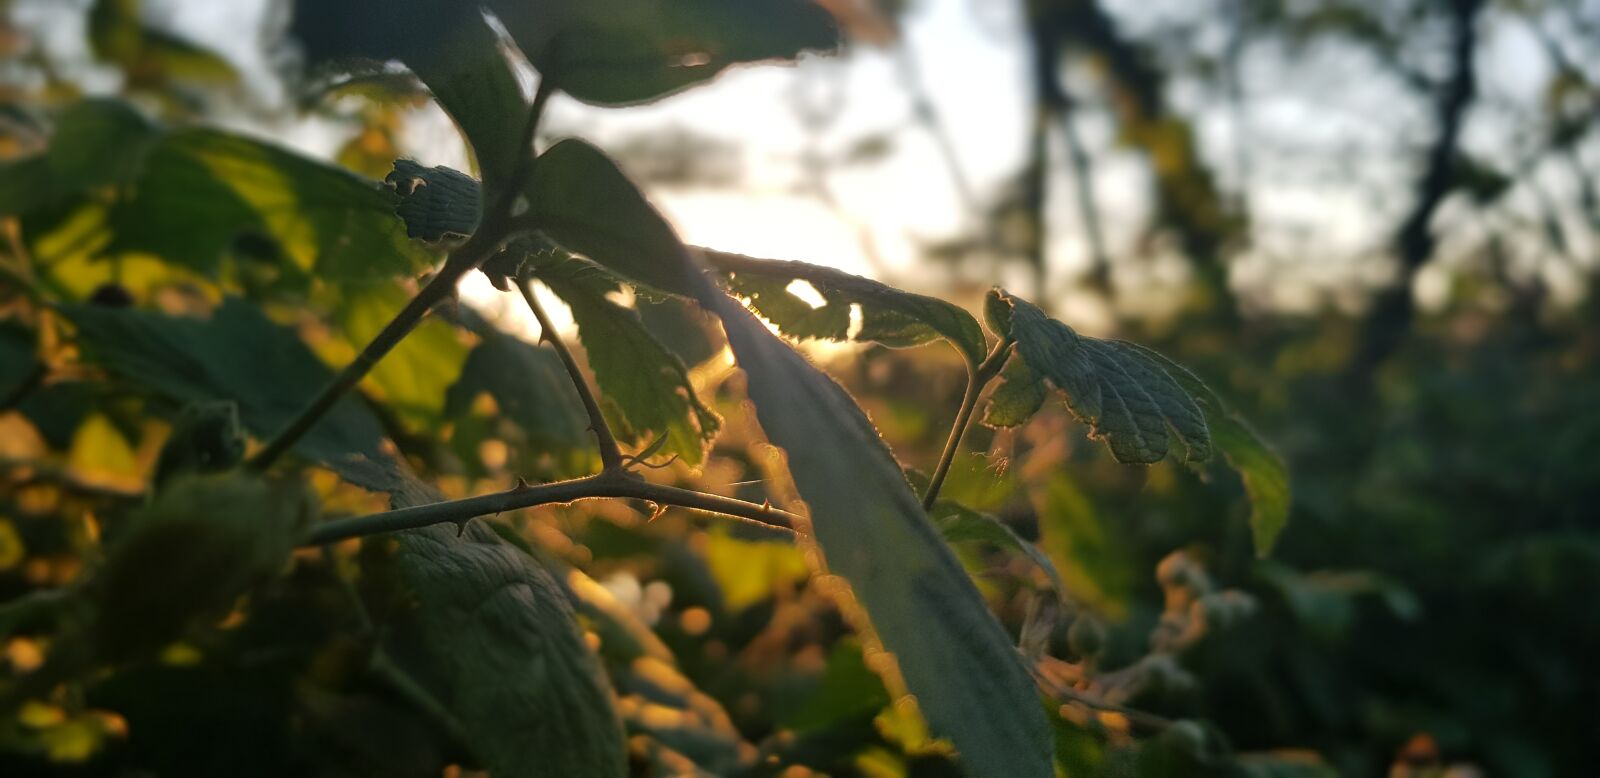 Samsung Galaxy S8 sample photo. Green leaves, roses, sunset photography